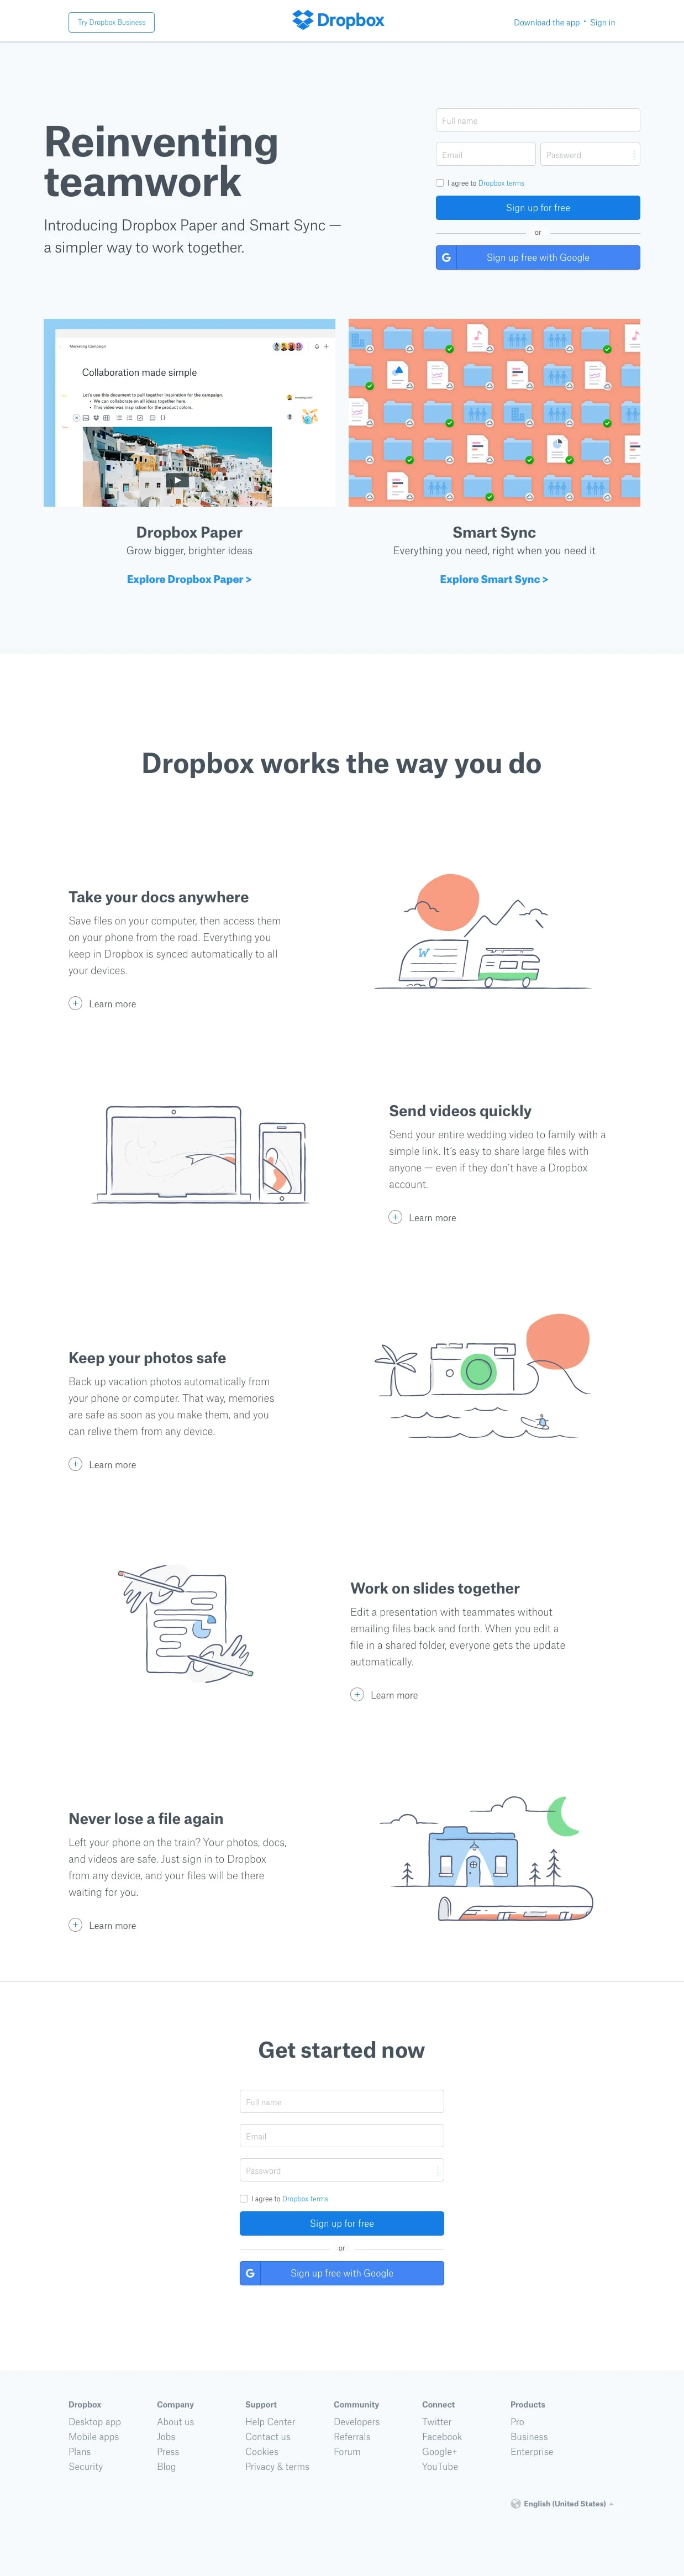 Dropbox Landing Page Example: Introducing Dropbox Paper and Smart Sync — a simpler way to work together.